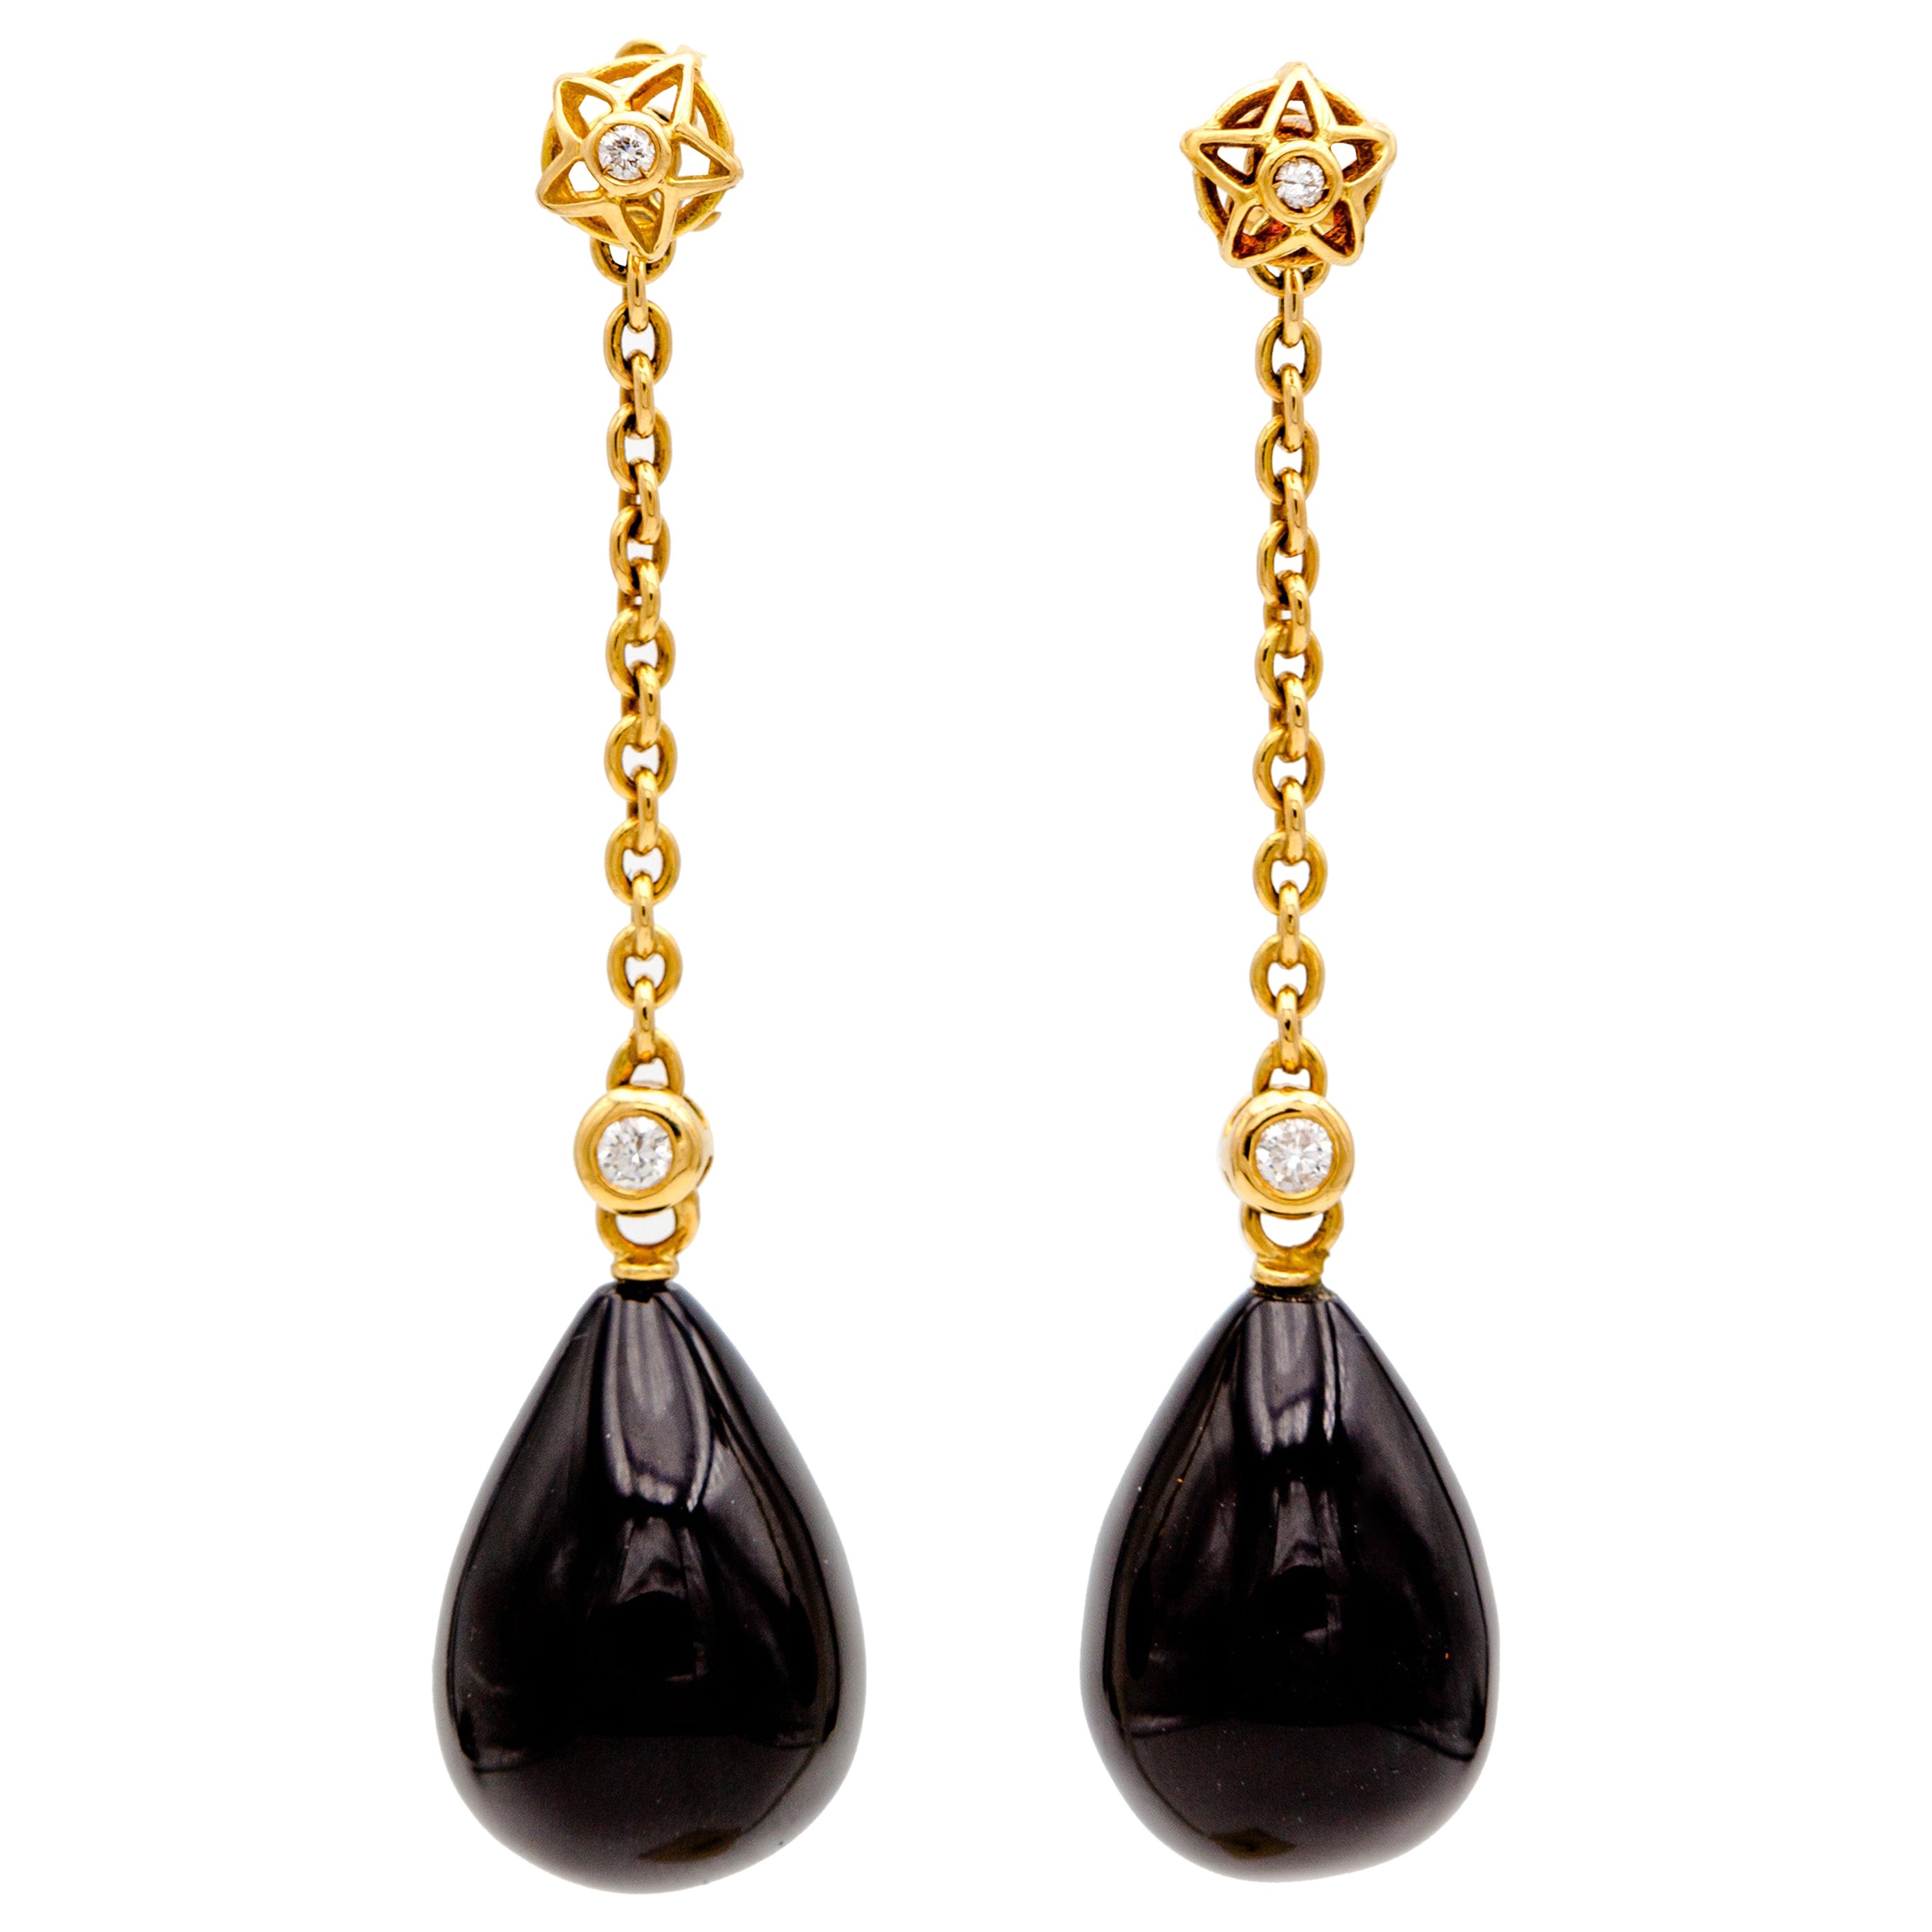 Black Onyx and Diamonds Long Gold Pendant Earrings "Stagioni" For Sale